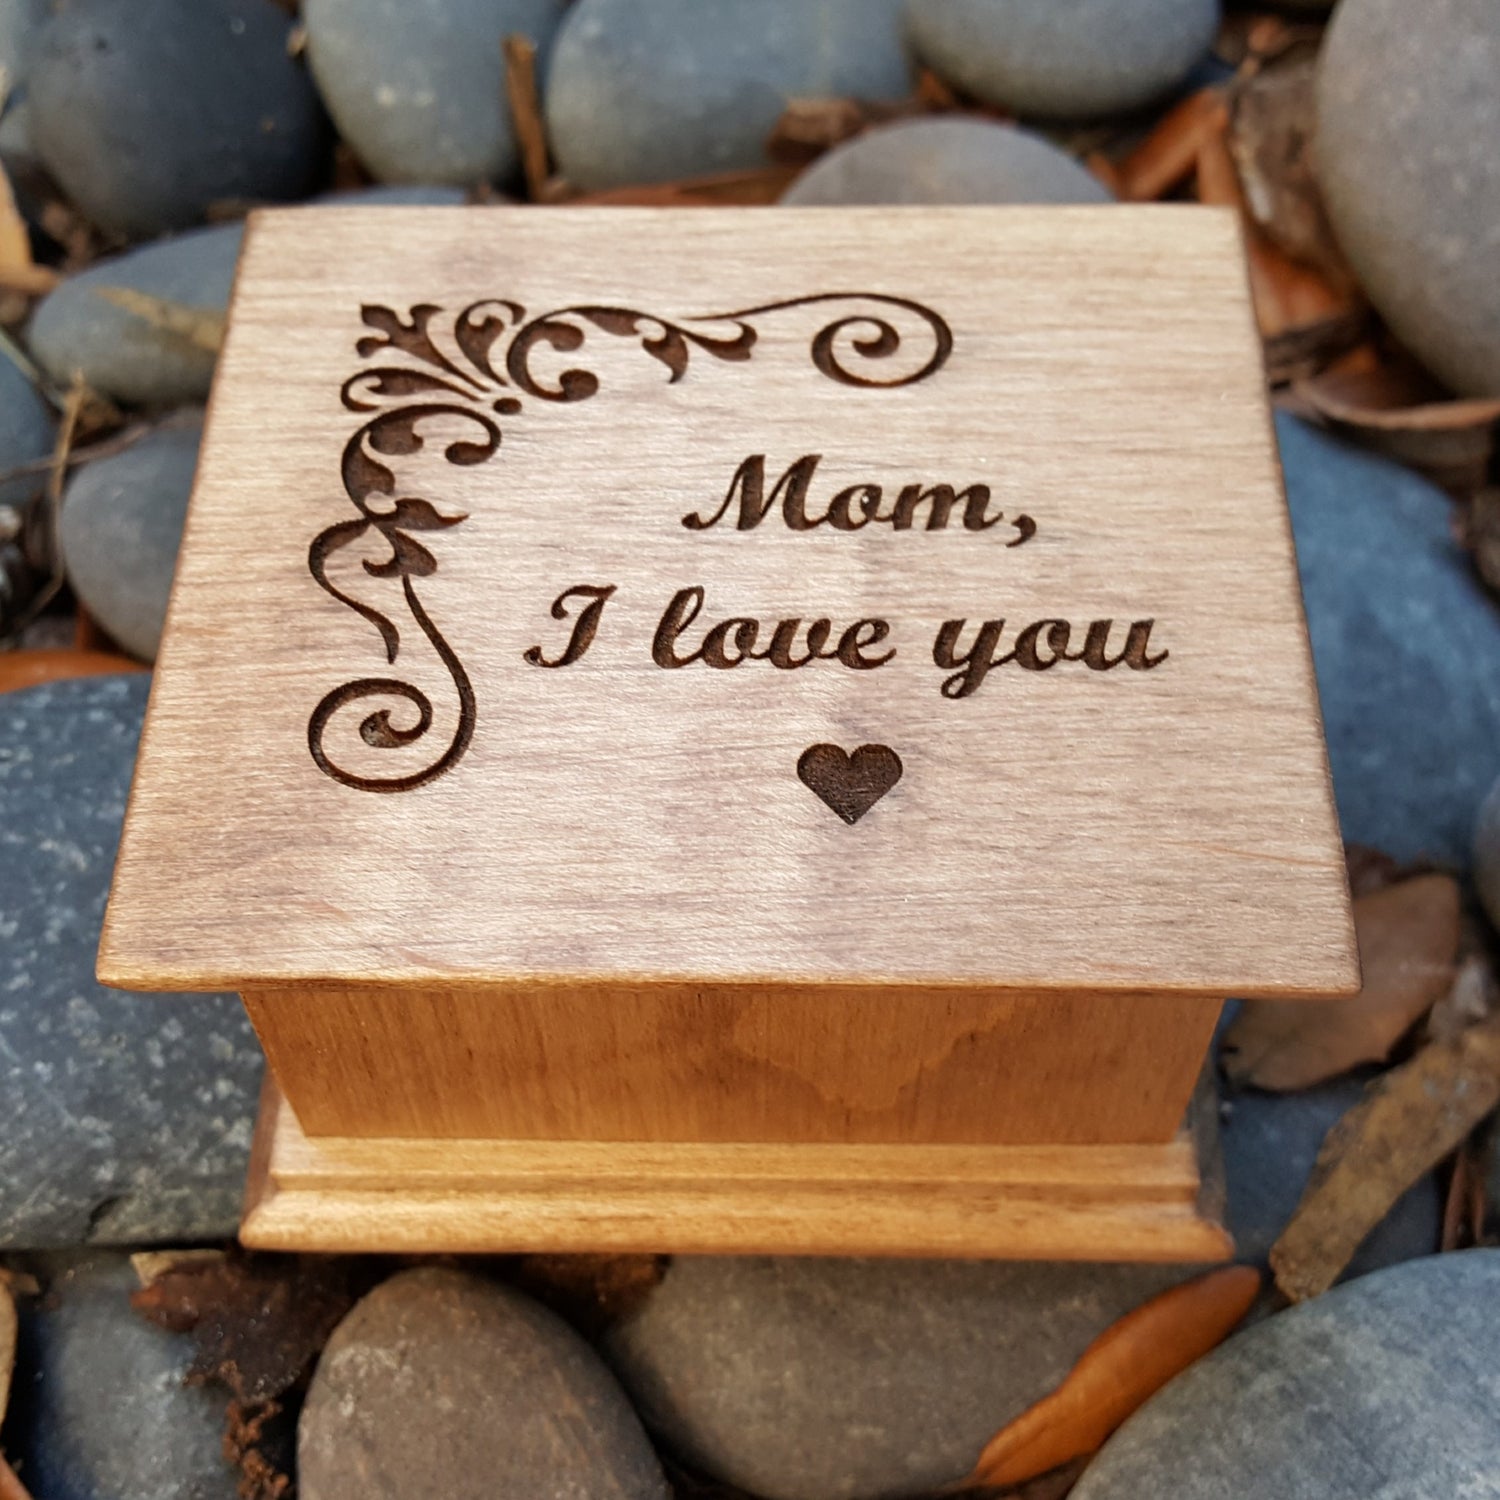 Mom, I love you music box for Moms birthday or Mothers day, customized music box, choose color and song, You are my sunshine mom